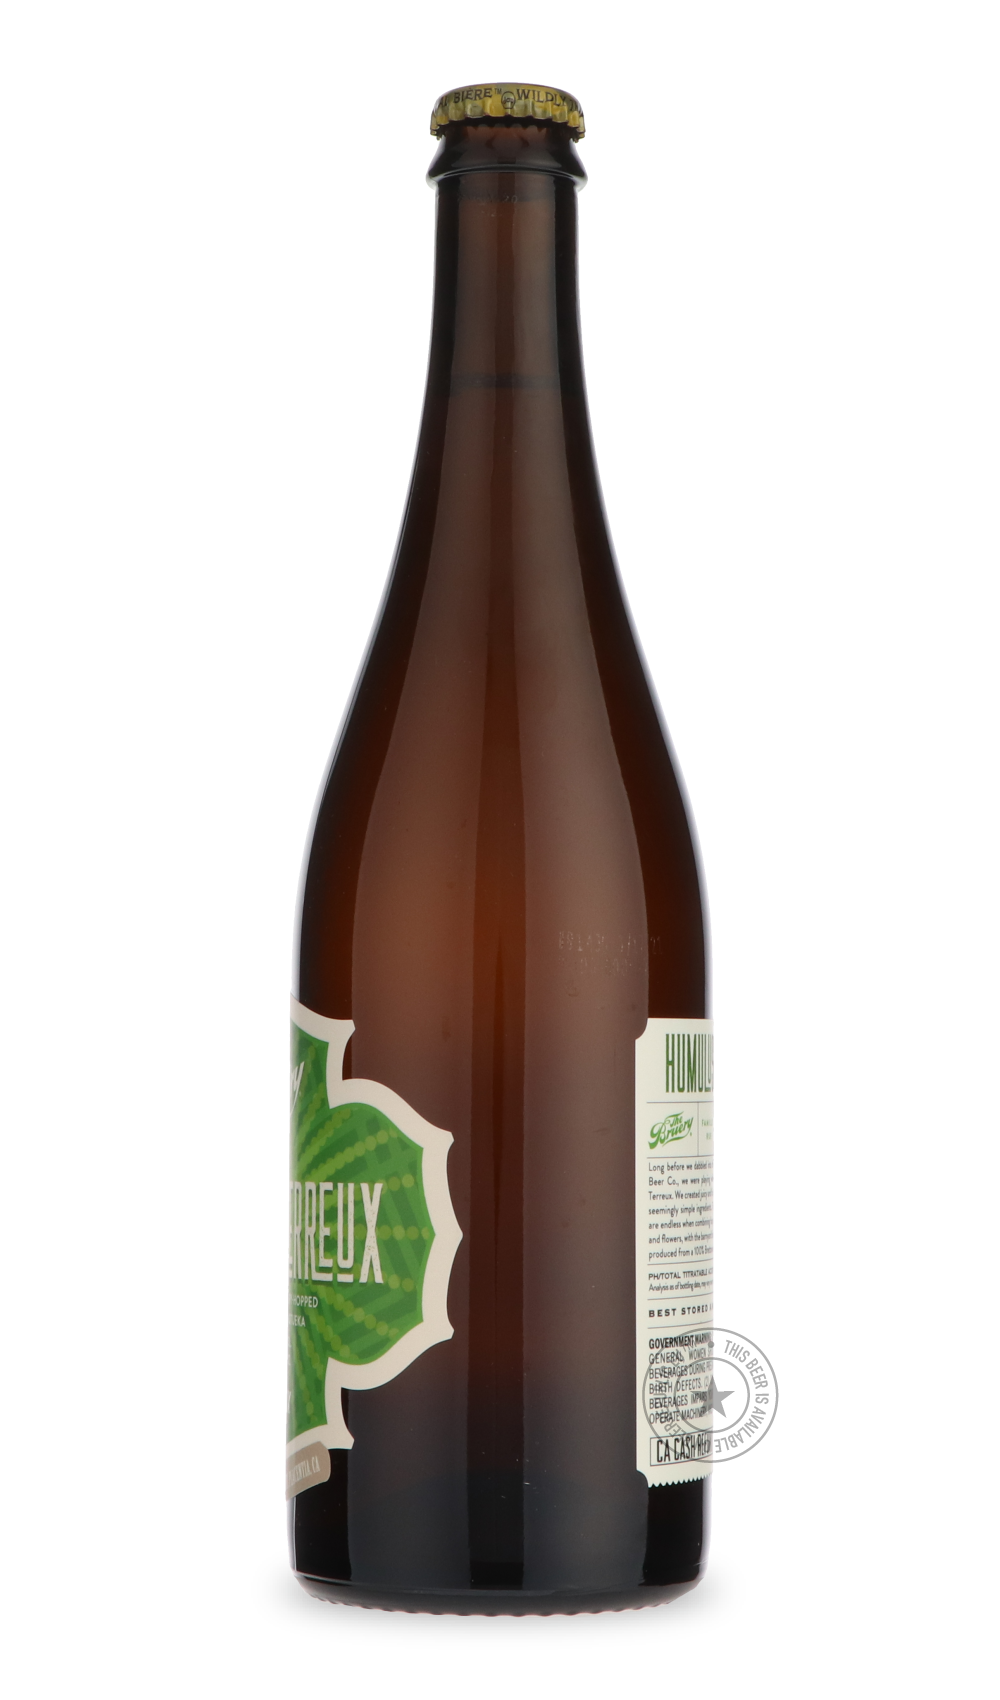 -The Bruery- Terreux Humulus (2021)-Sour / Wild & Fruity- Only @ Beer Republic - The best online beer store for American & Canadian craft beer - Buy beer online from the USA and Canada - Bier online kopen - Amerikaans bier kopen - Craft beer store - Craft beer kopen - Amerikanisch bier kaufen - Bier online kaufen - Acheter biere online - IPA - Stout - Porter - New England IPA - Hazy IPA - Imperial Stout - Barrel Aged - Barrel Aged Imperial Stout - Brown - Dark beer - Blond - Blonde - Pilsner - Lager - Wheat